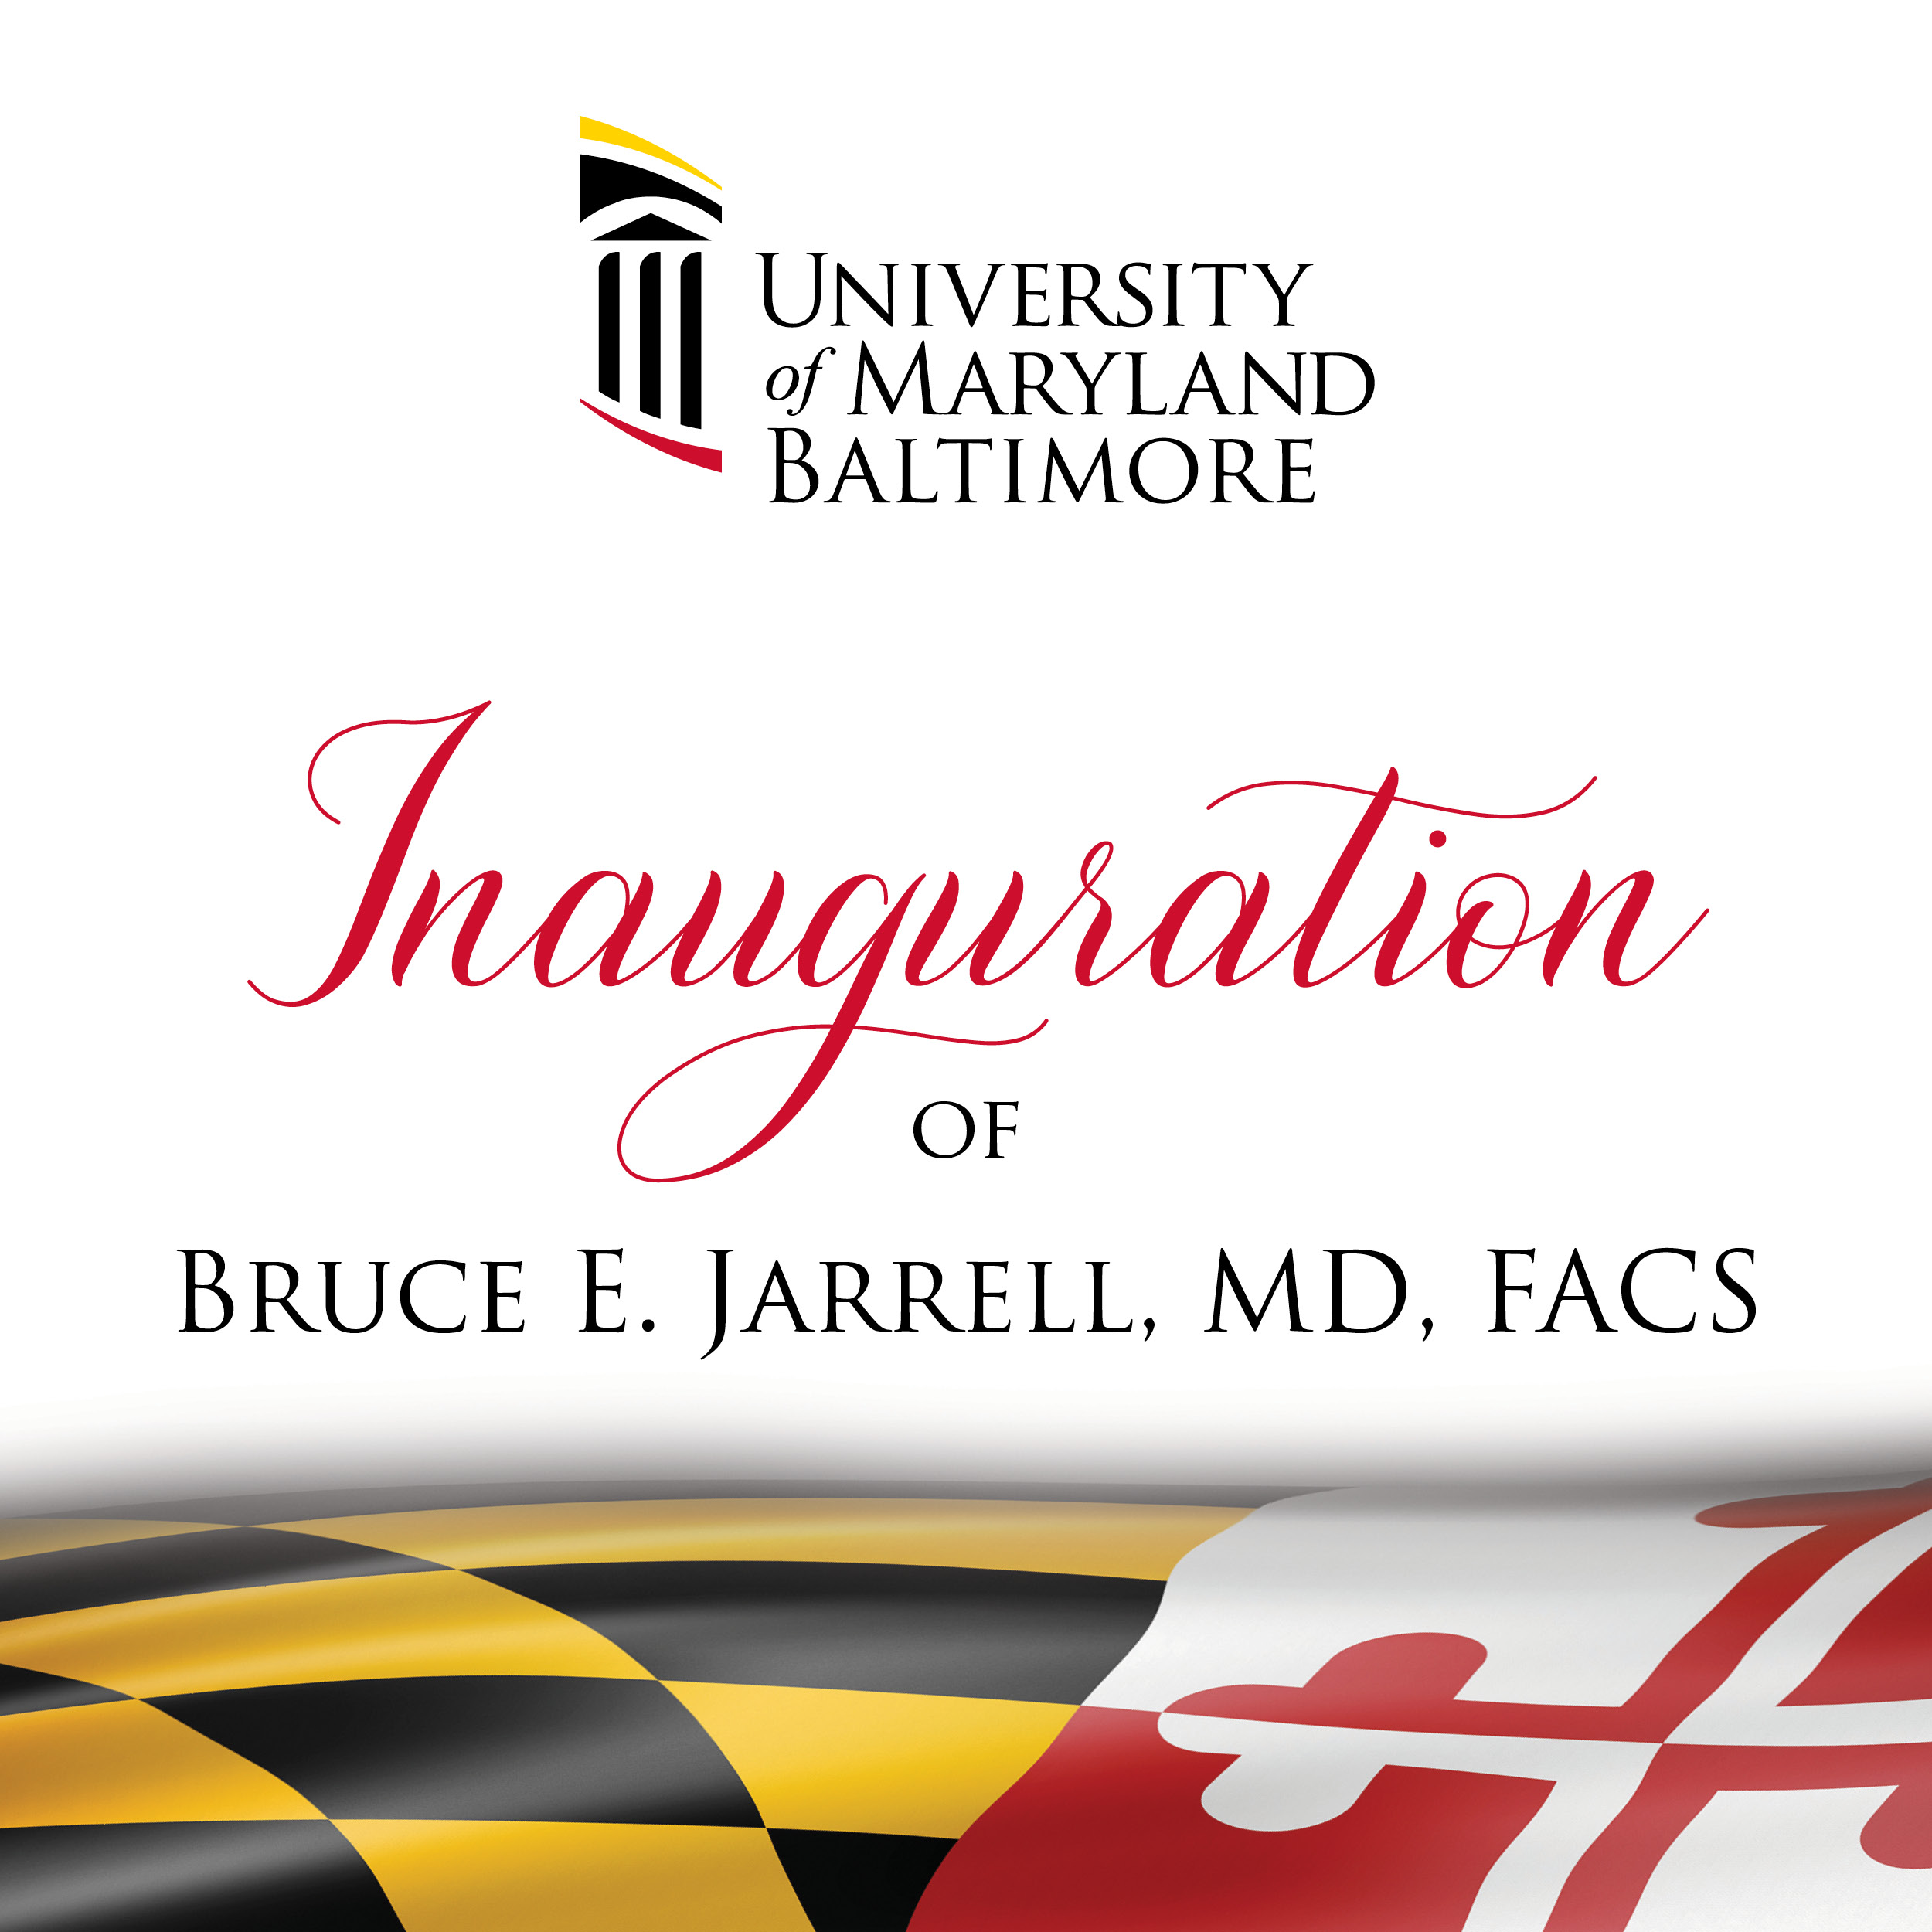 Inauguration of Bruce E. Jarrell, MD, FACS, as UMB's Seventh President